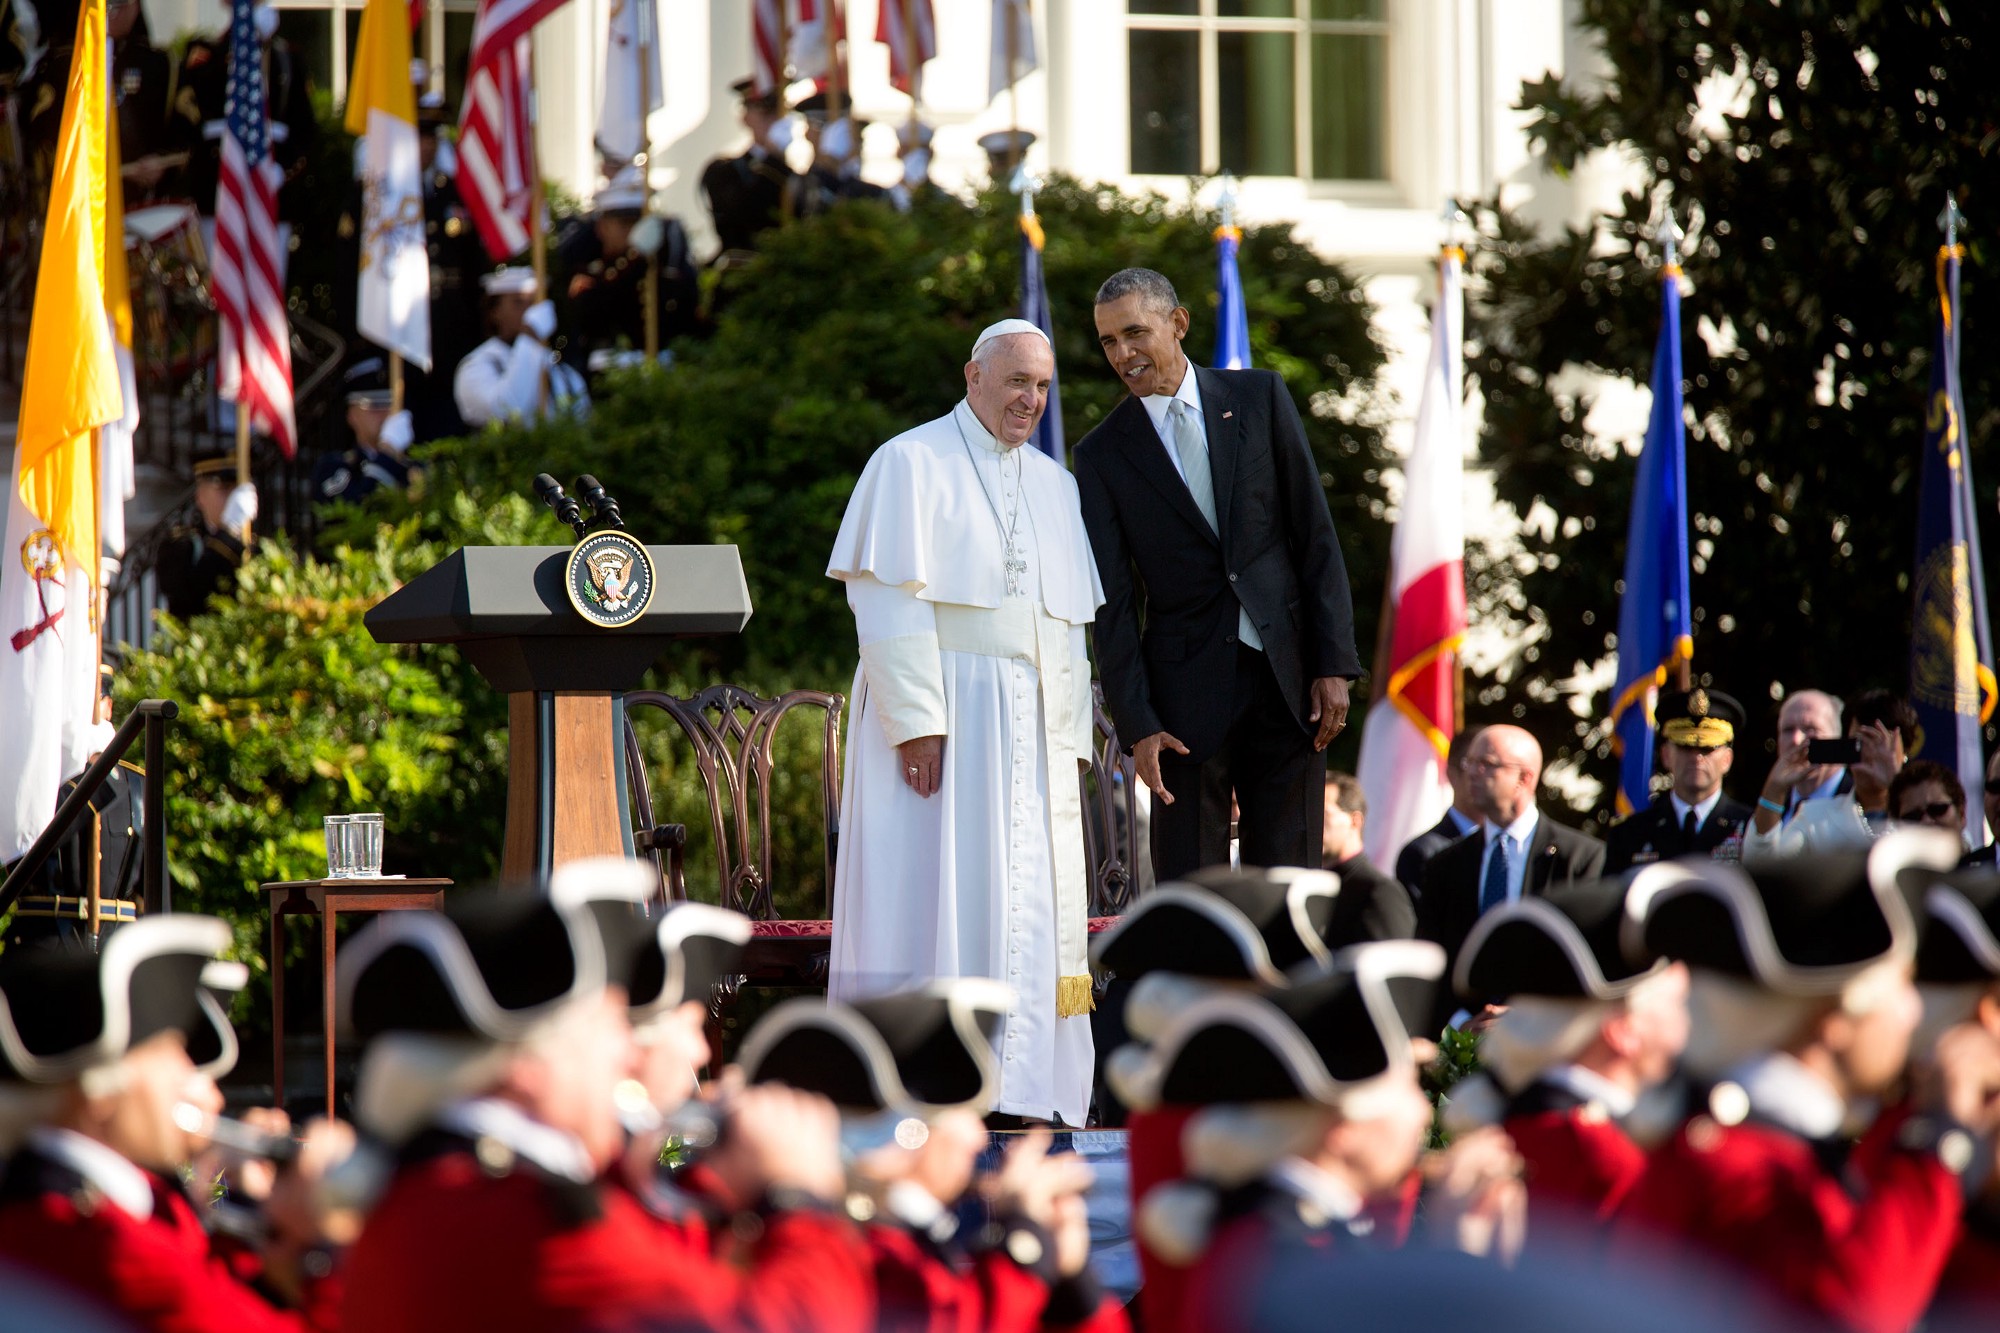 President Obama talks to Pope Francis as the Army Fife and Drum Corps march. (Official White House Photo by Lawrence Jackson)